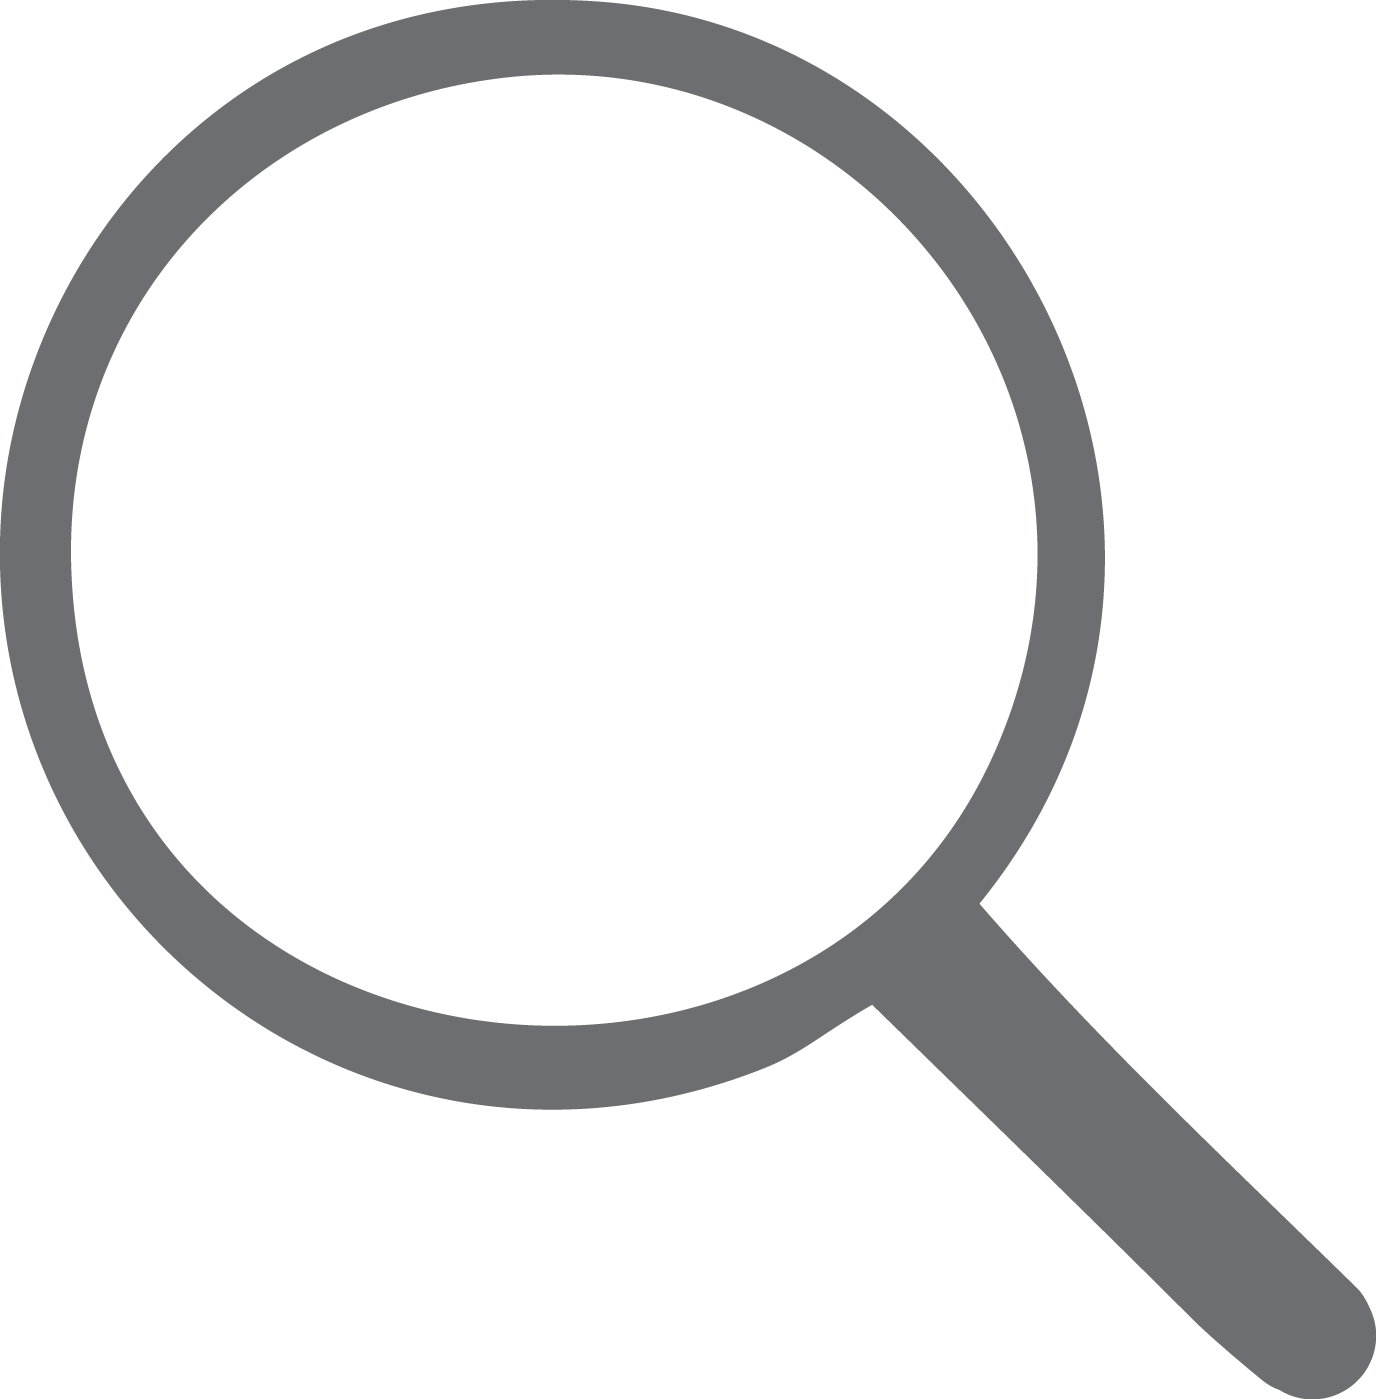 Magnifying Glass Icon PNG HD Quality